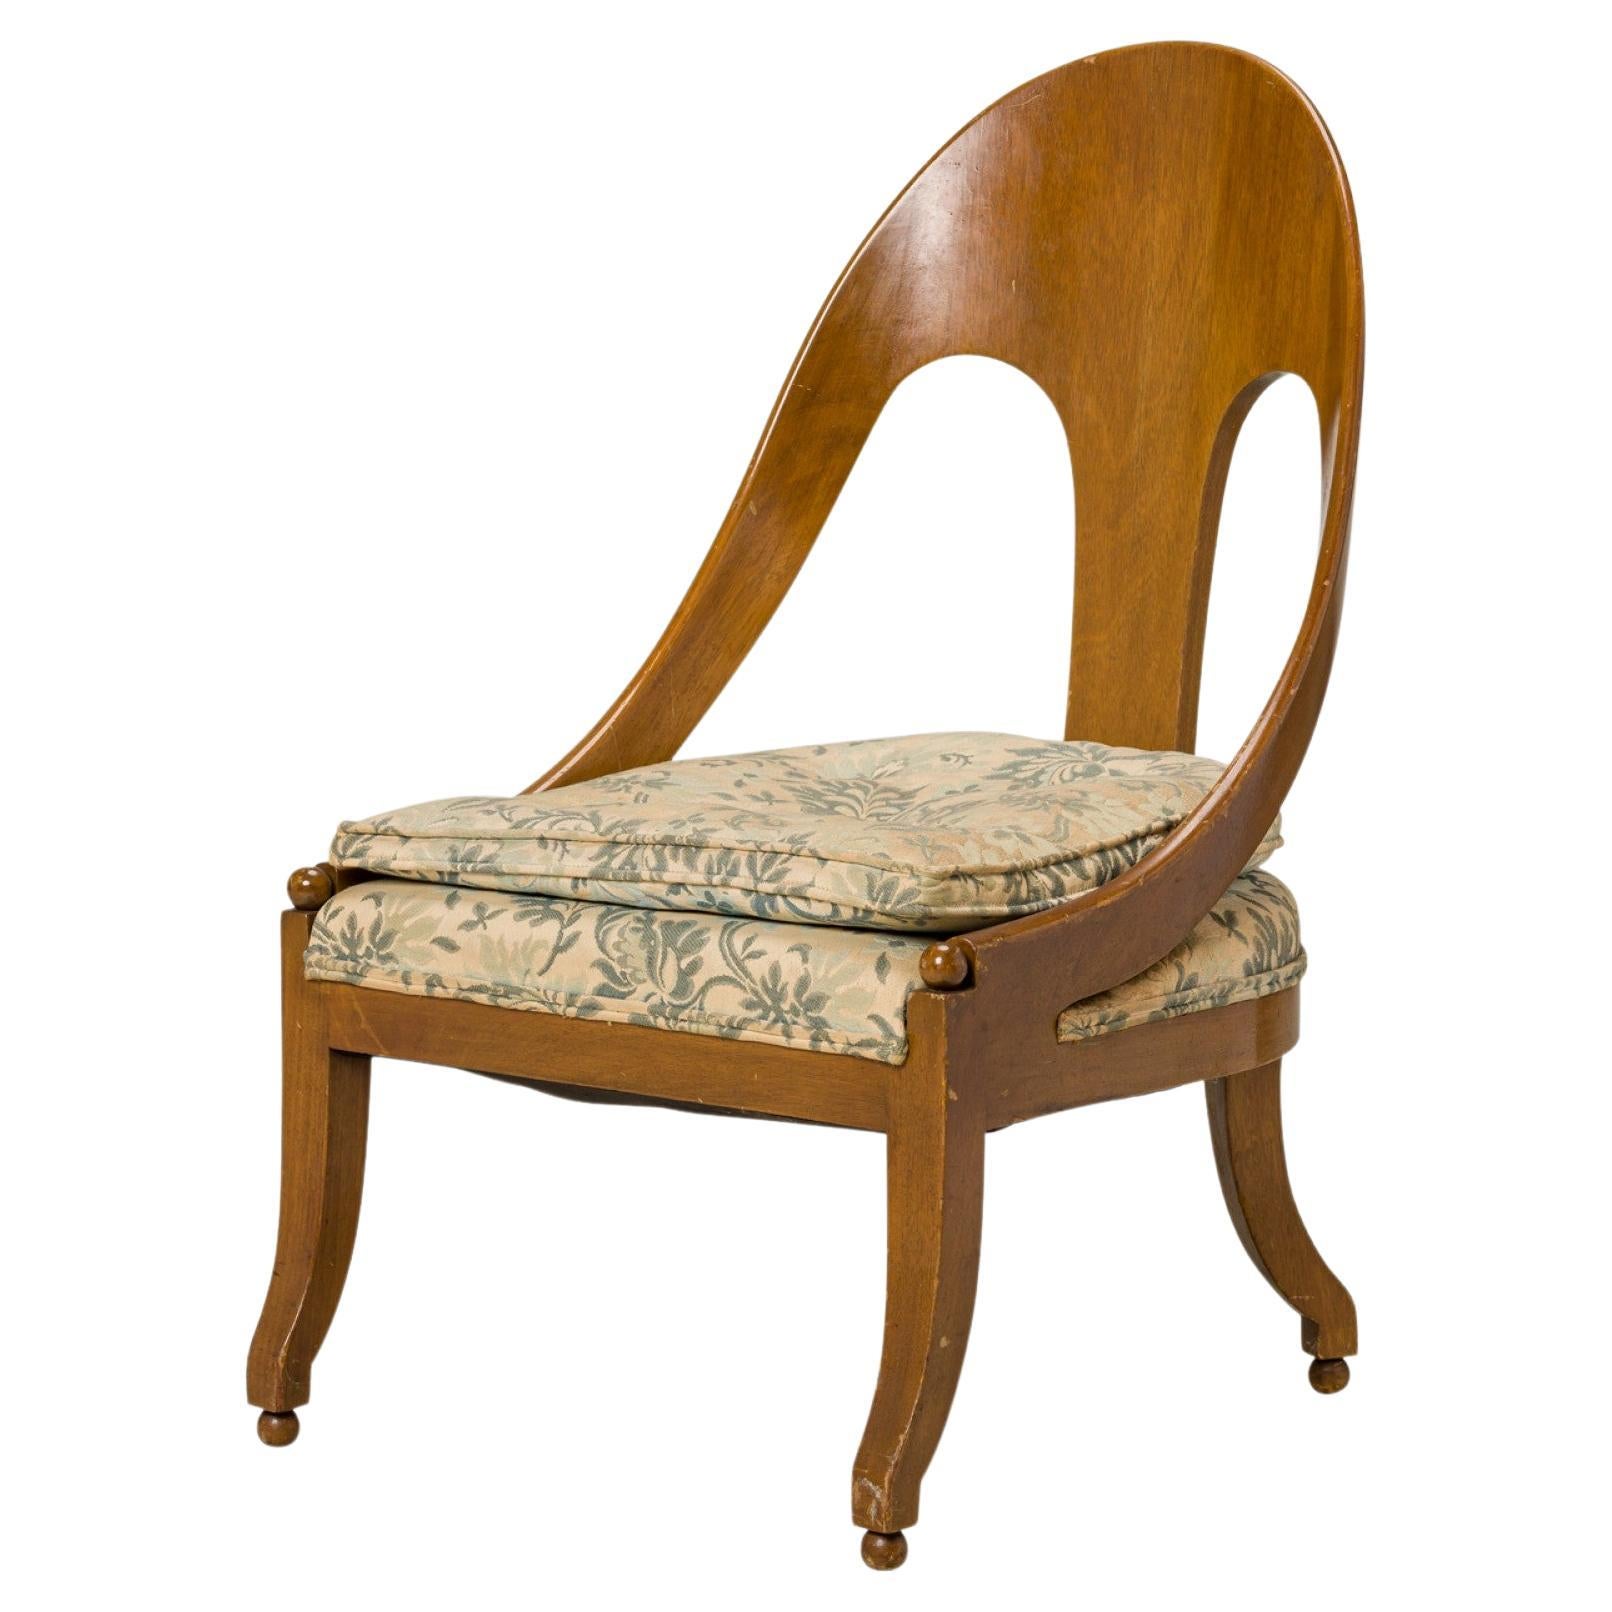 Walnut and Floral Fabric Upholstery Spoon Back Side Chair For Sale